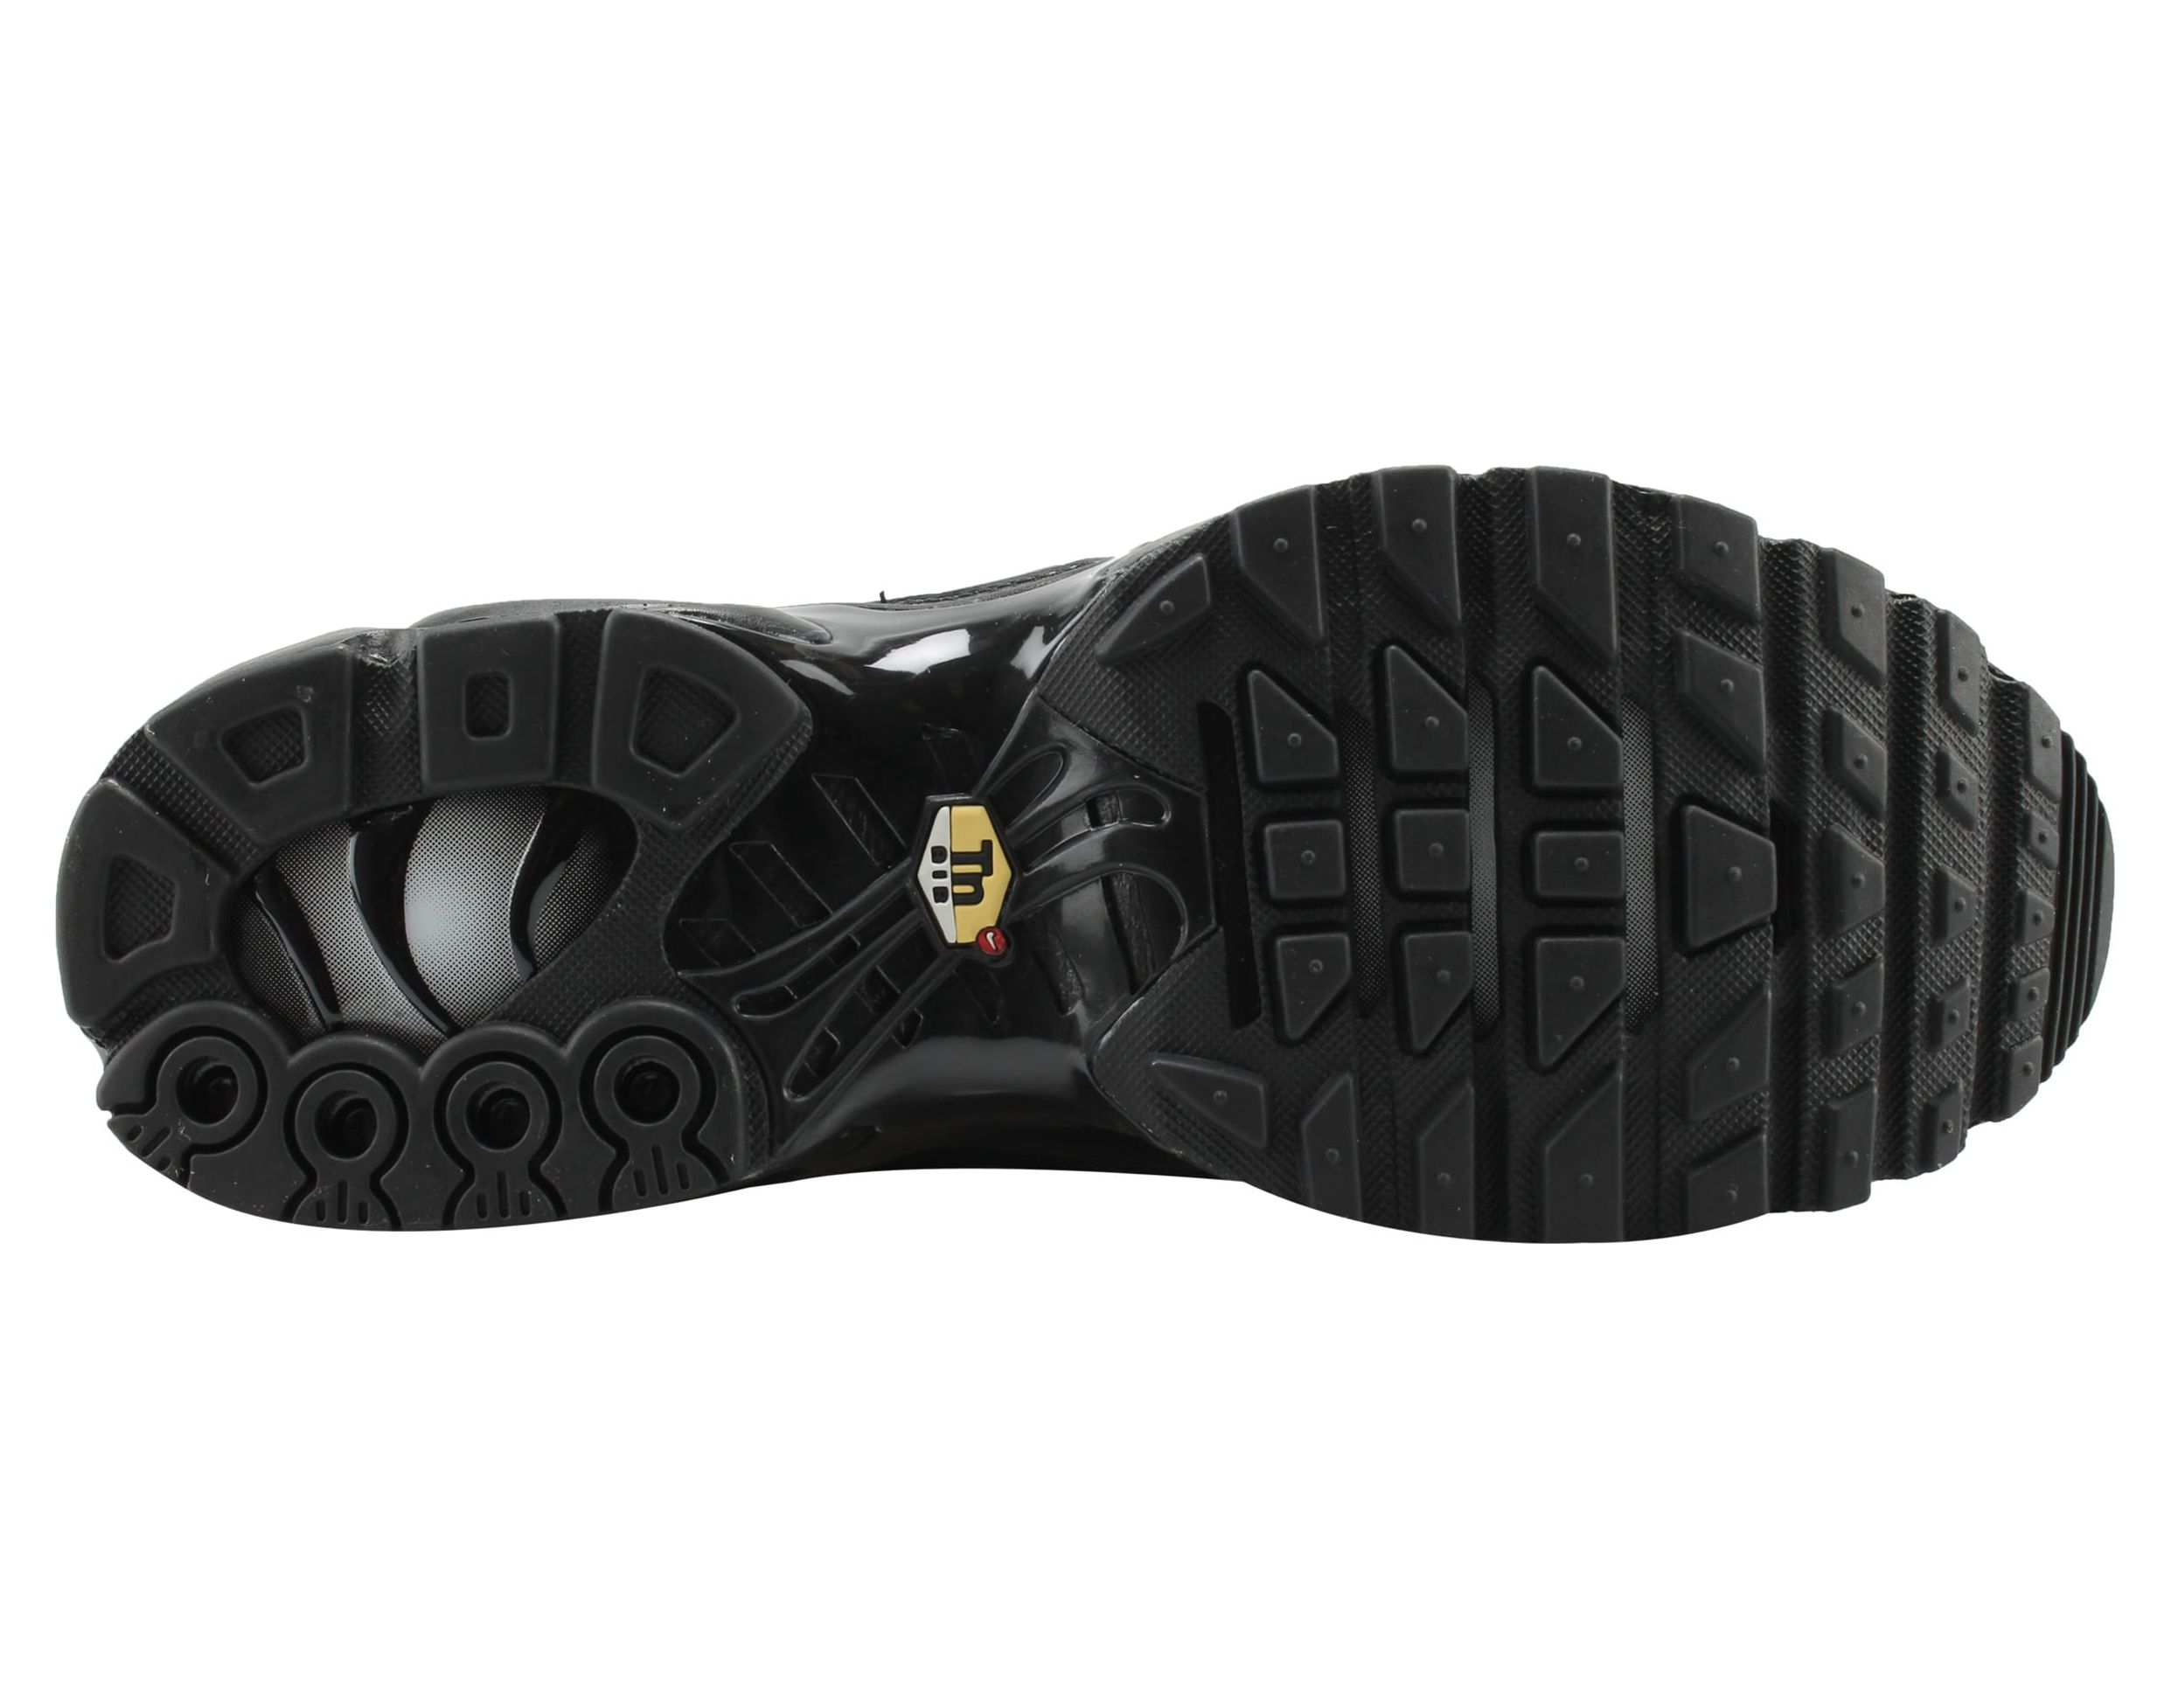 Nike Men's Air Max Plus Tuned 1 Fabric Trainer Shoes - image 5 of 6